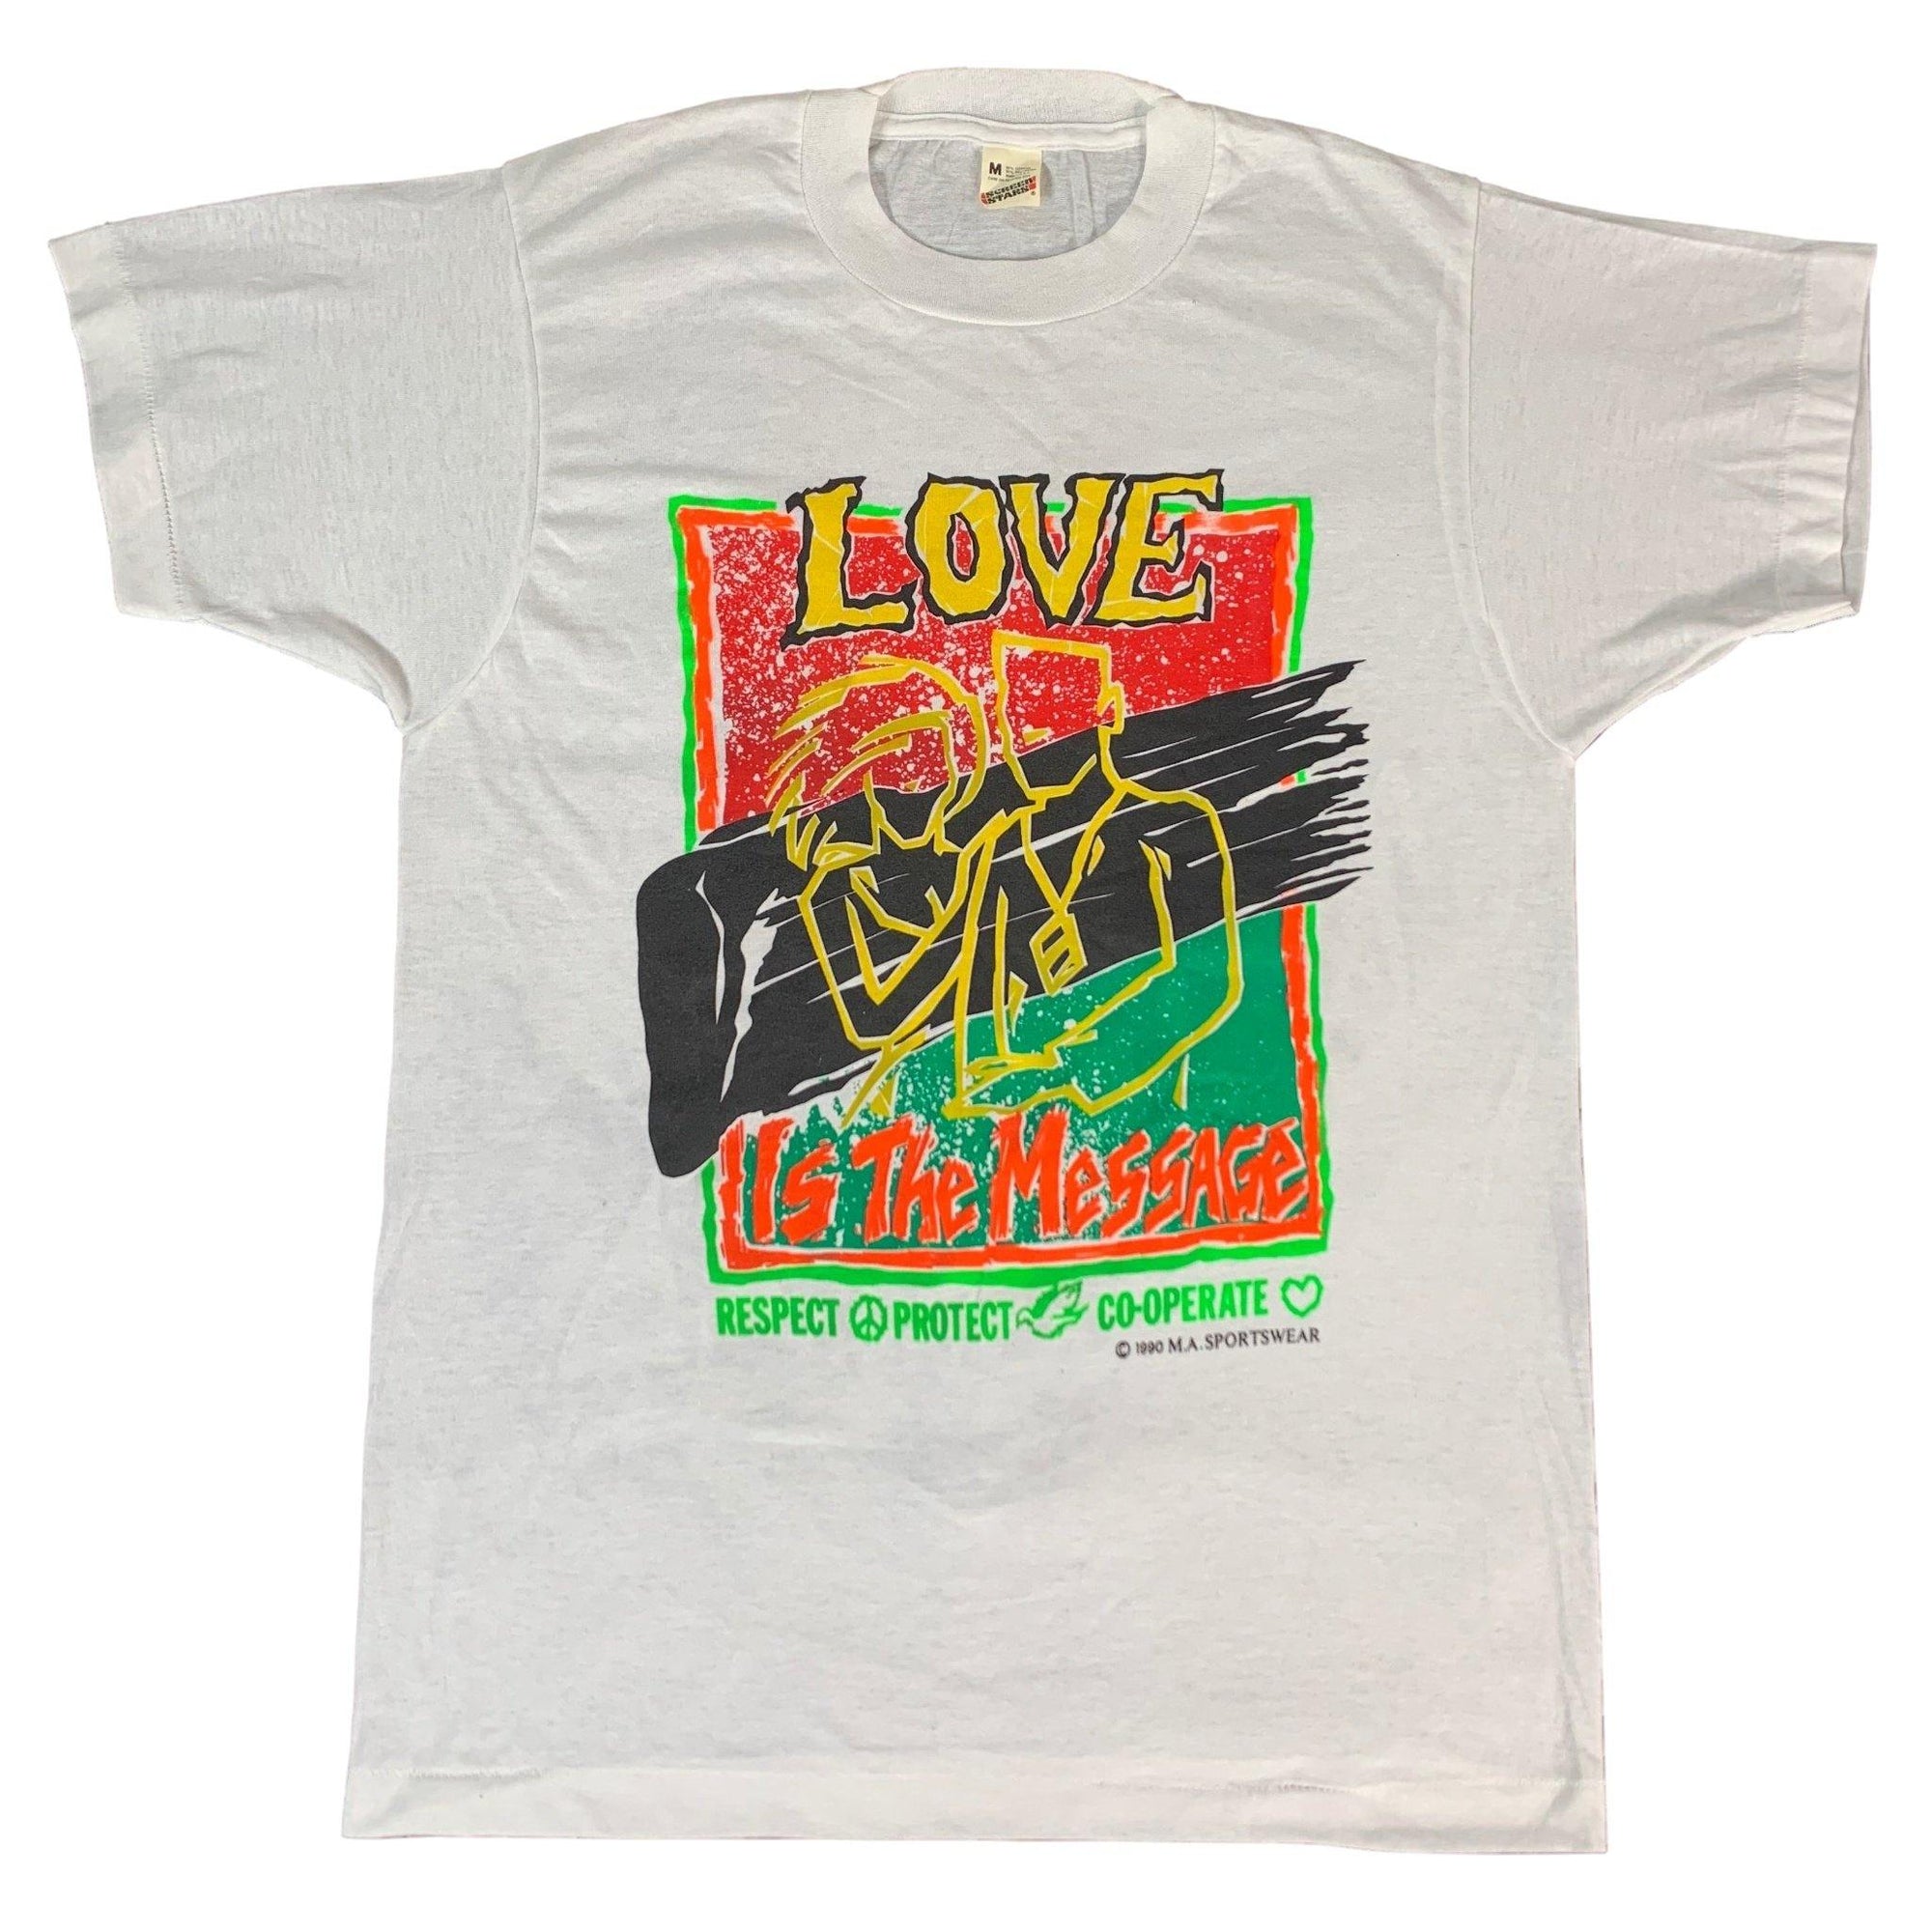 Vintage Love Is The Message "Respect & Protect" T-Shirt - jointcustodydc